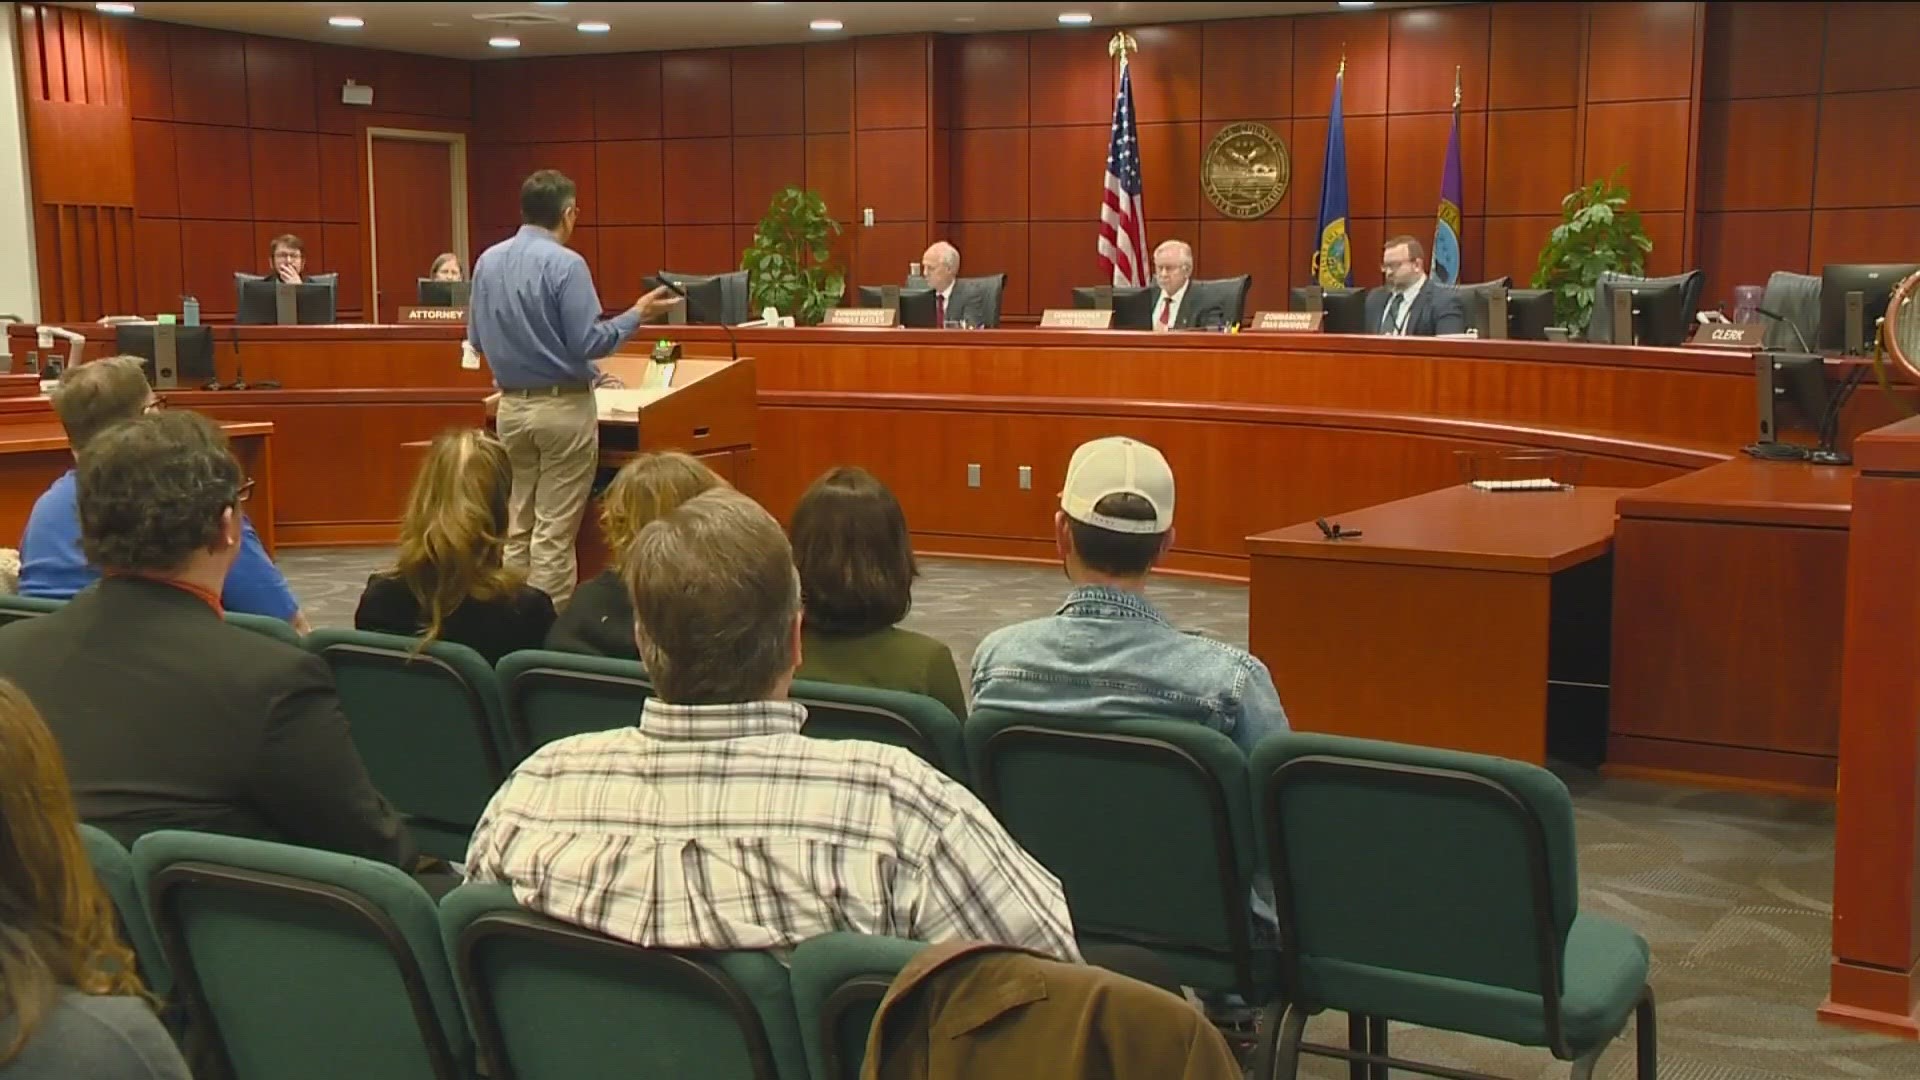 Several hundred people showed up to Monday's hearing in response to a recent petition filed by a group called the “Concerned Citizens of Meridian.”